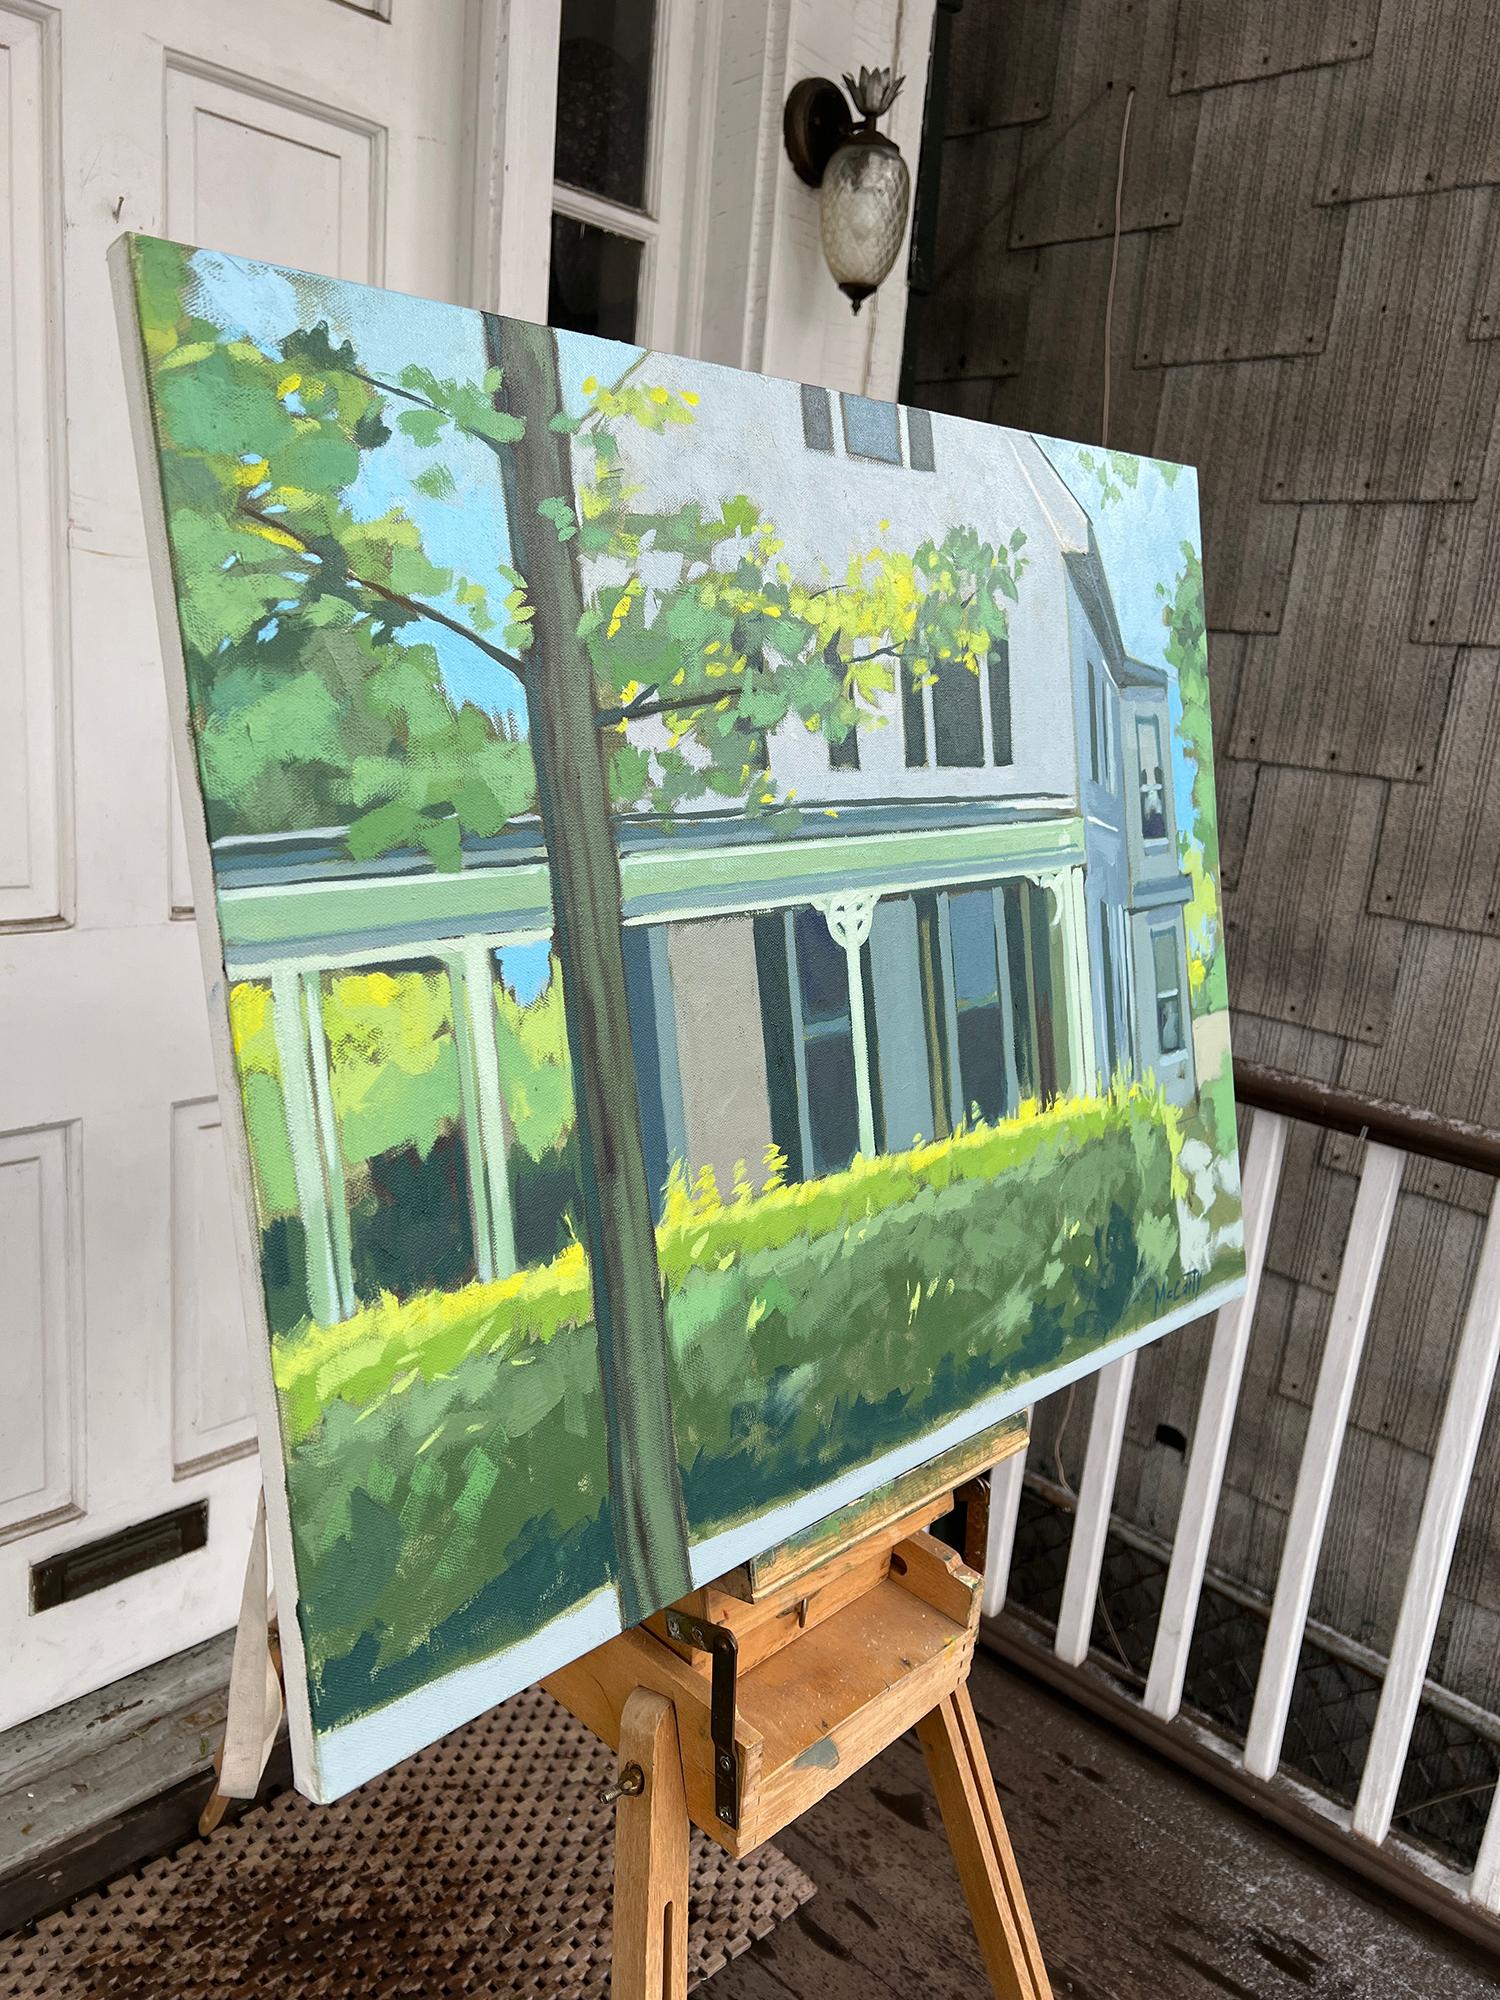 <p>Artist Comments<br>As the day nears its end, the summer sun casts a warm glow upon this rural landscape. The green hedge and surrounding foliage bask in the afternoon light, while the Victorian house stands among the shades. The painting conveys